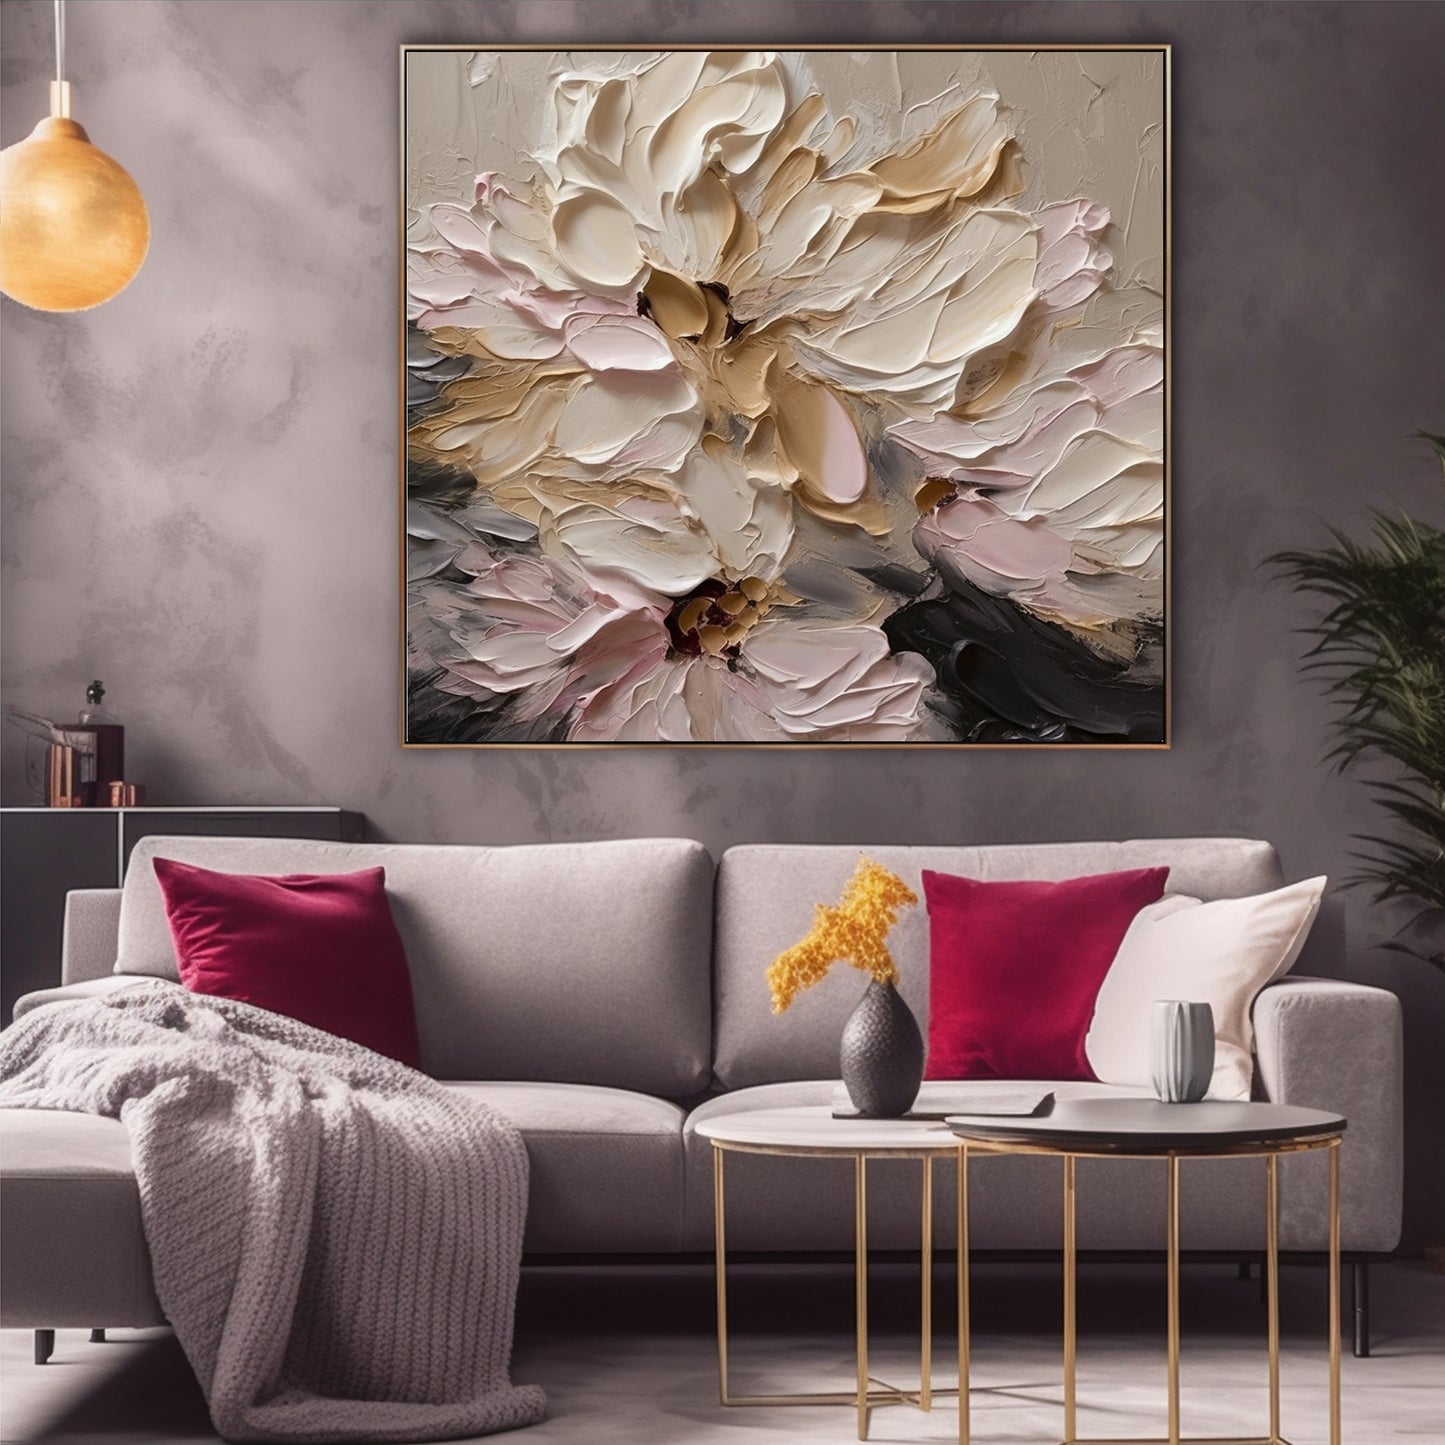 Large Flower Oil Painting on Canvas, Original Abstract Floral Painting F0416ART2318